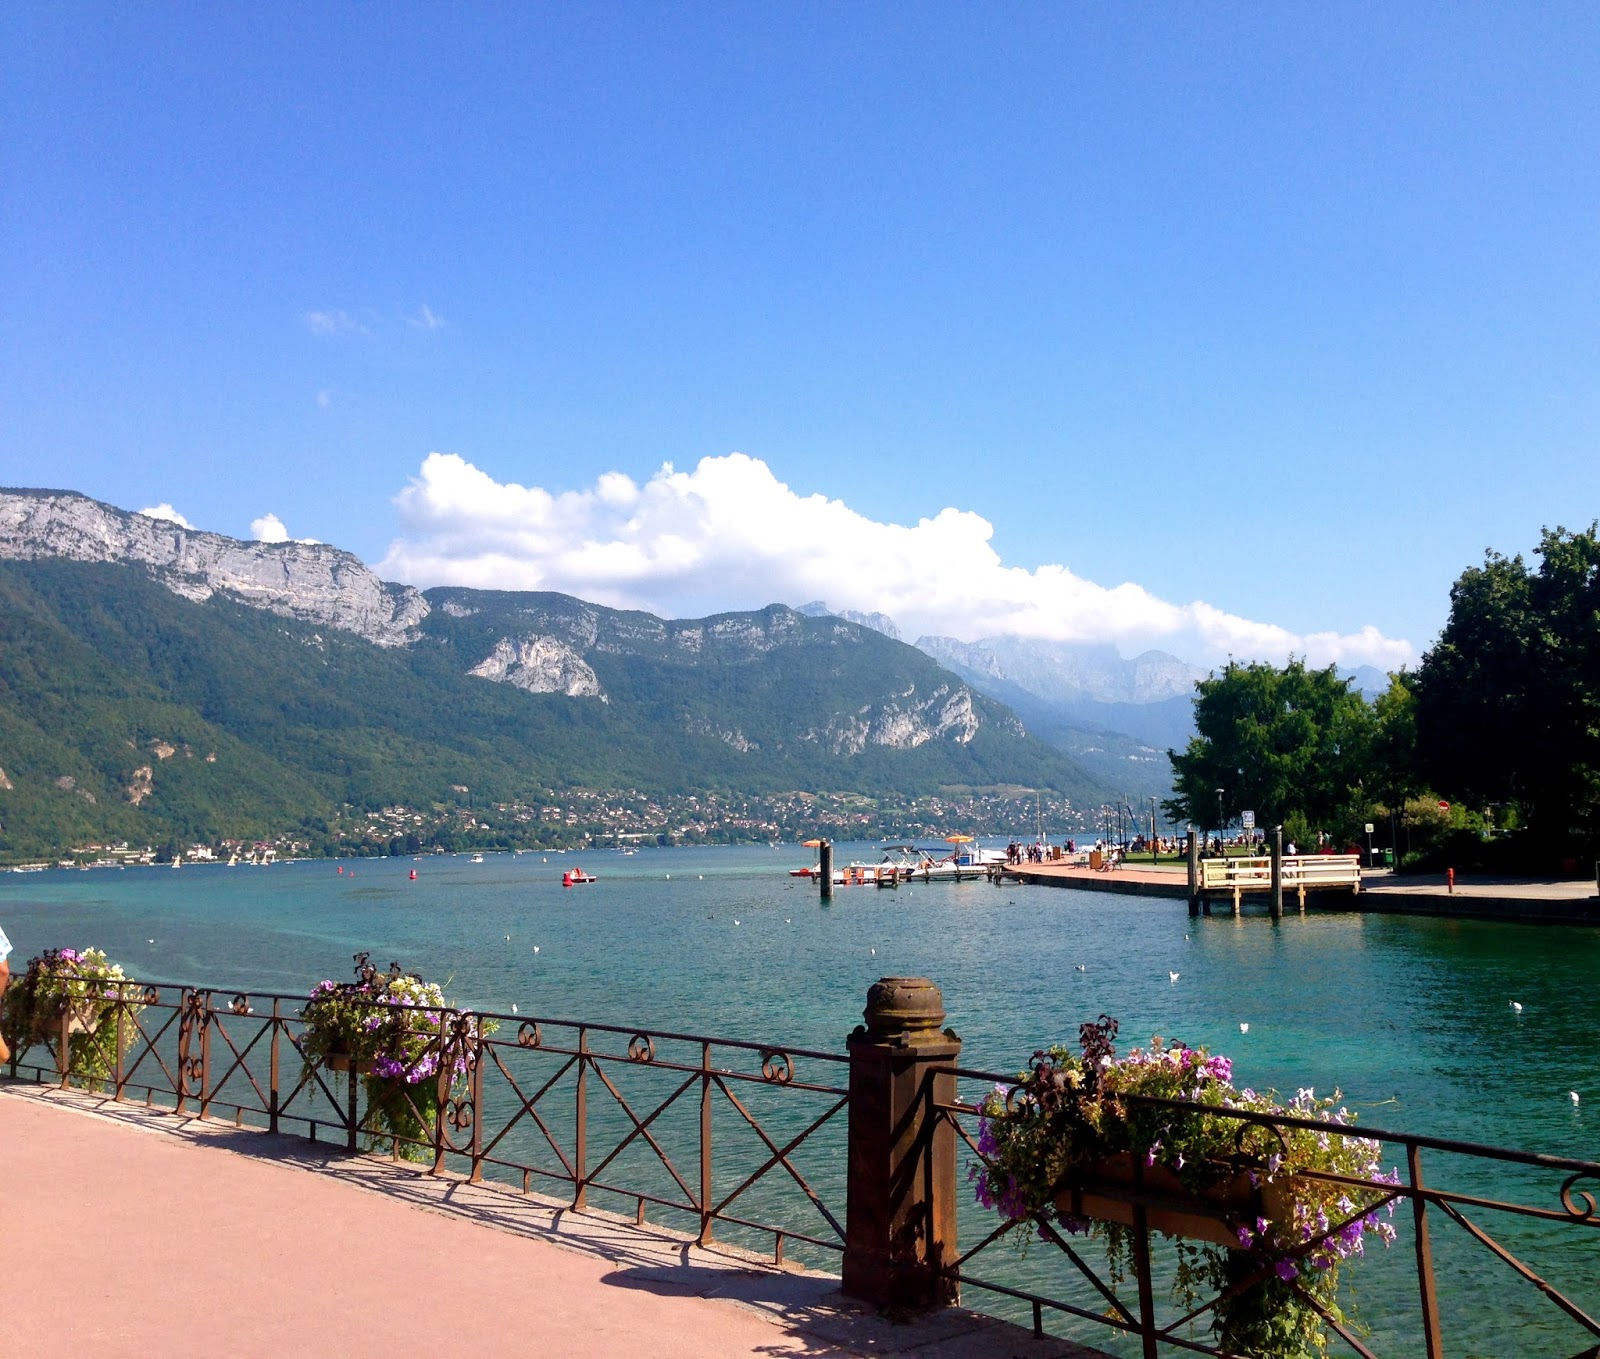 Our Swiss Adventure: The Venice of the Alps - Lake Annecy, France